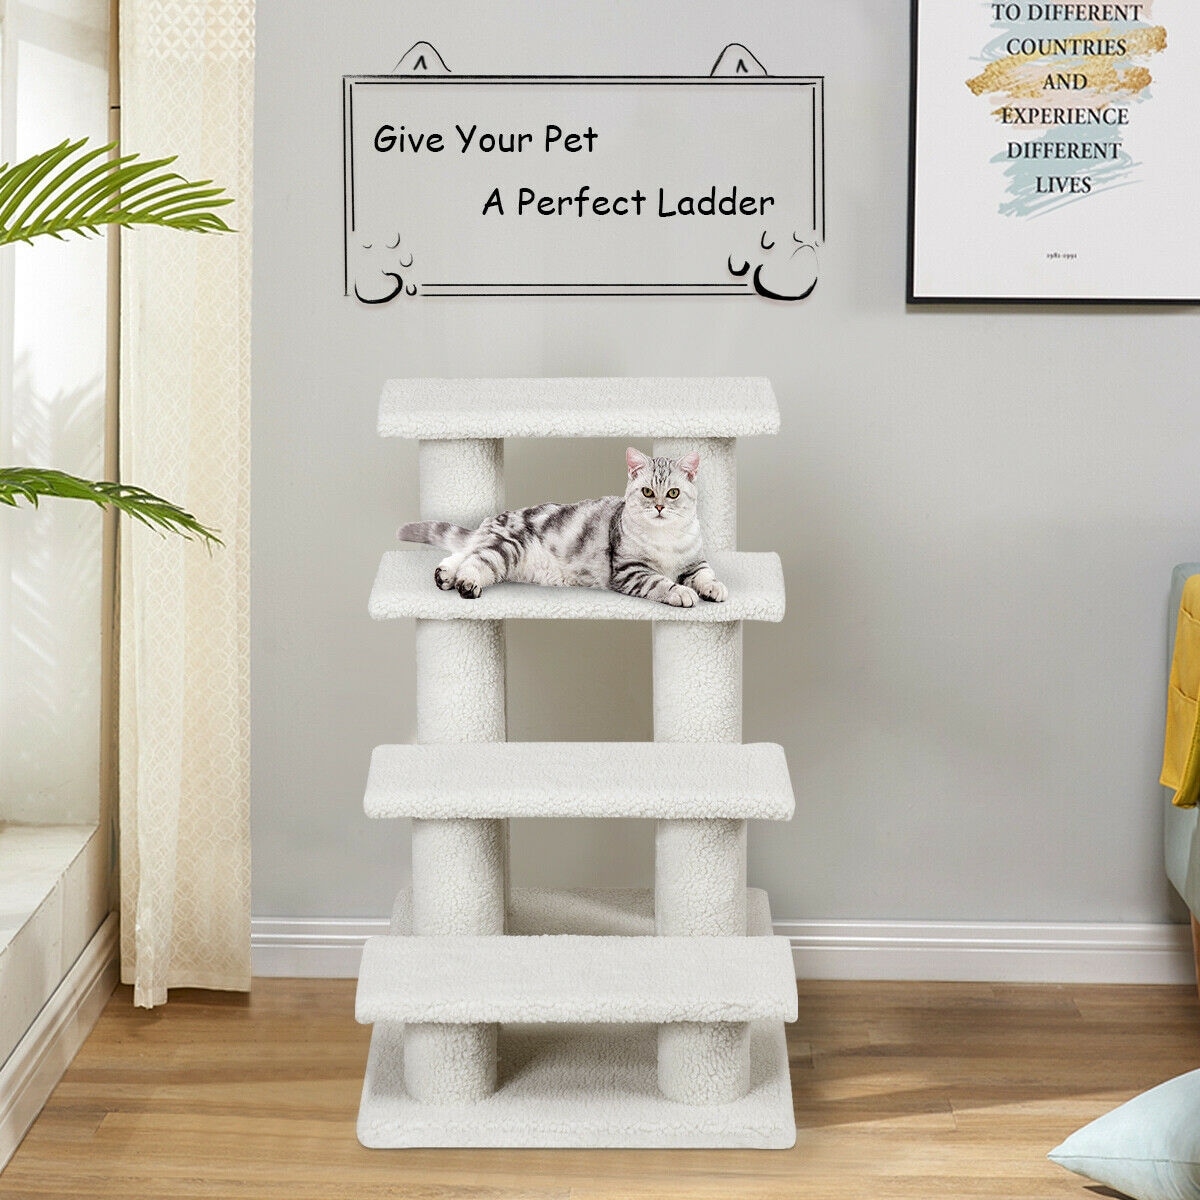 25" 4 Steps Pet Stairs Ladder Ramp Scratching Post Cat Tree Climber for Cat Dog